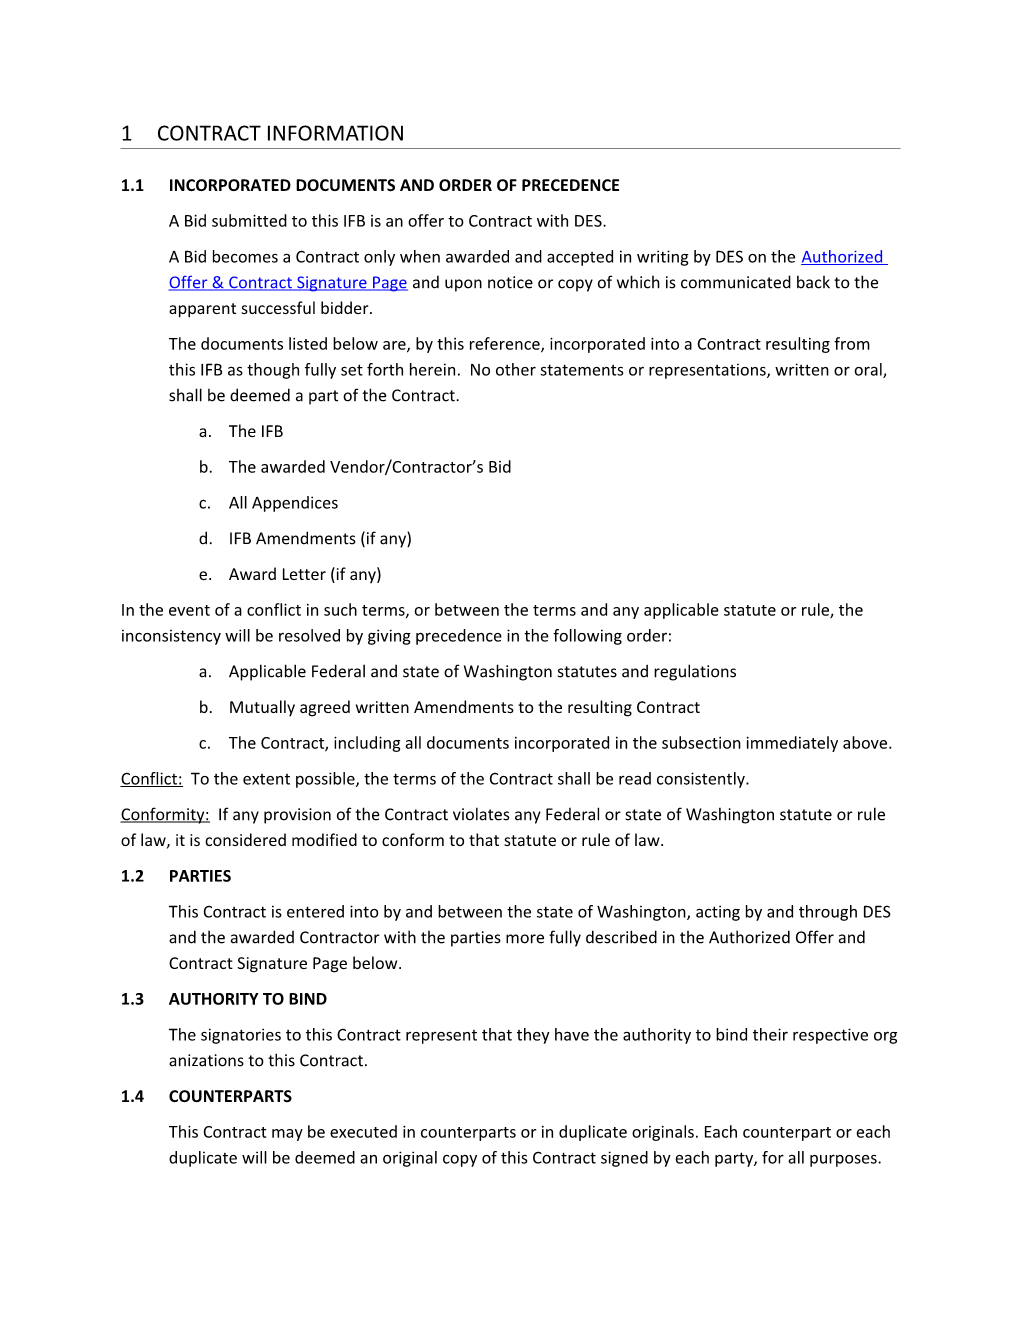 1.1 Incorporated Documents and Order of Precedence